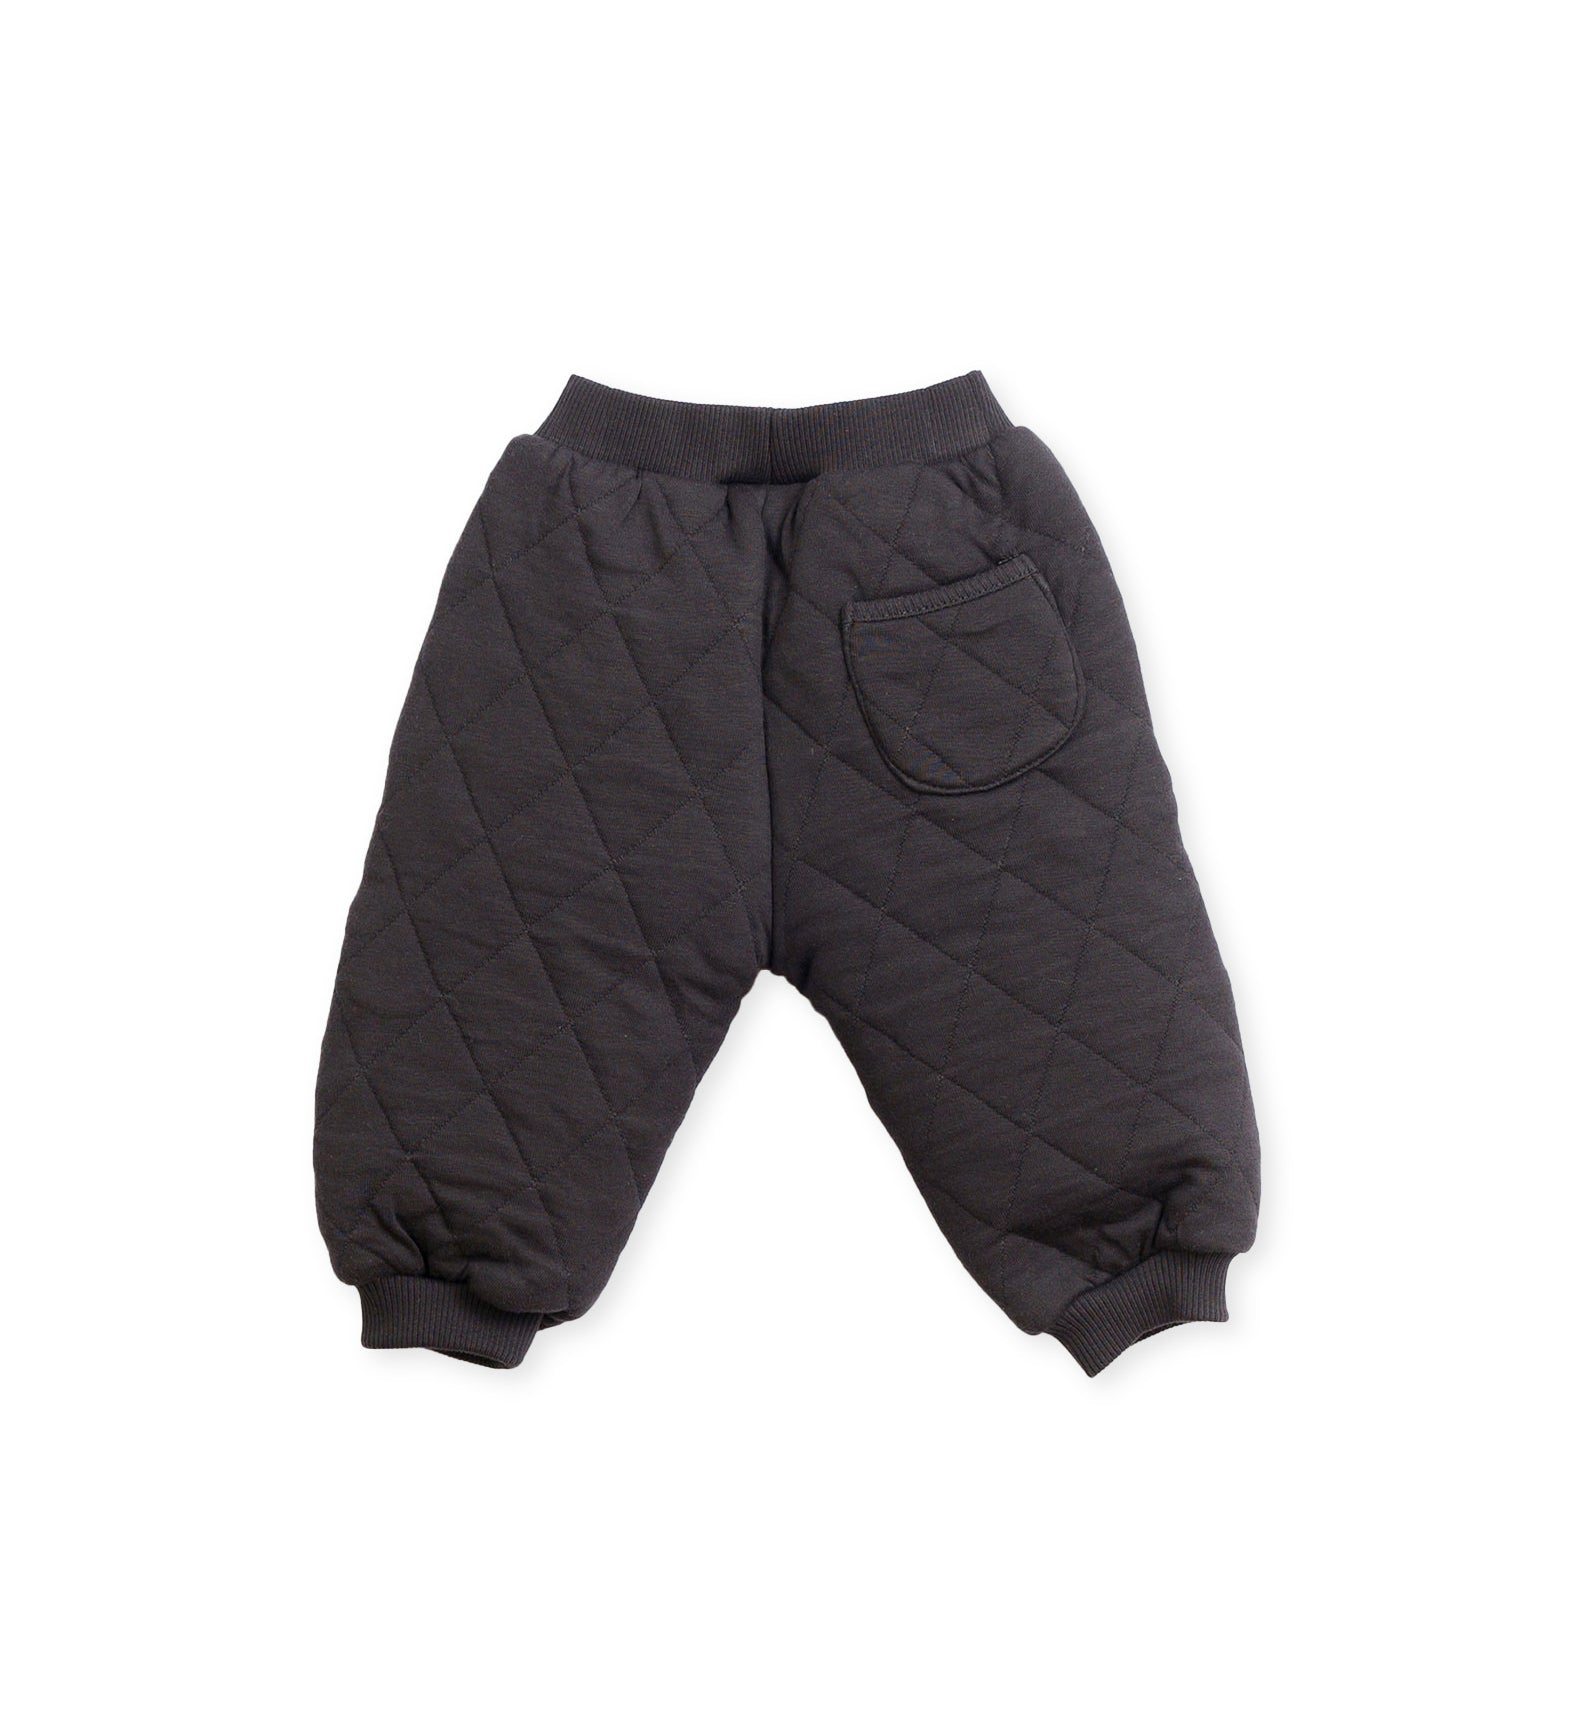 Play up padded pants chia - dark gray trousers